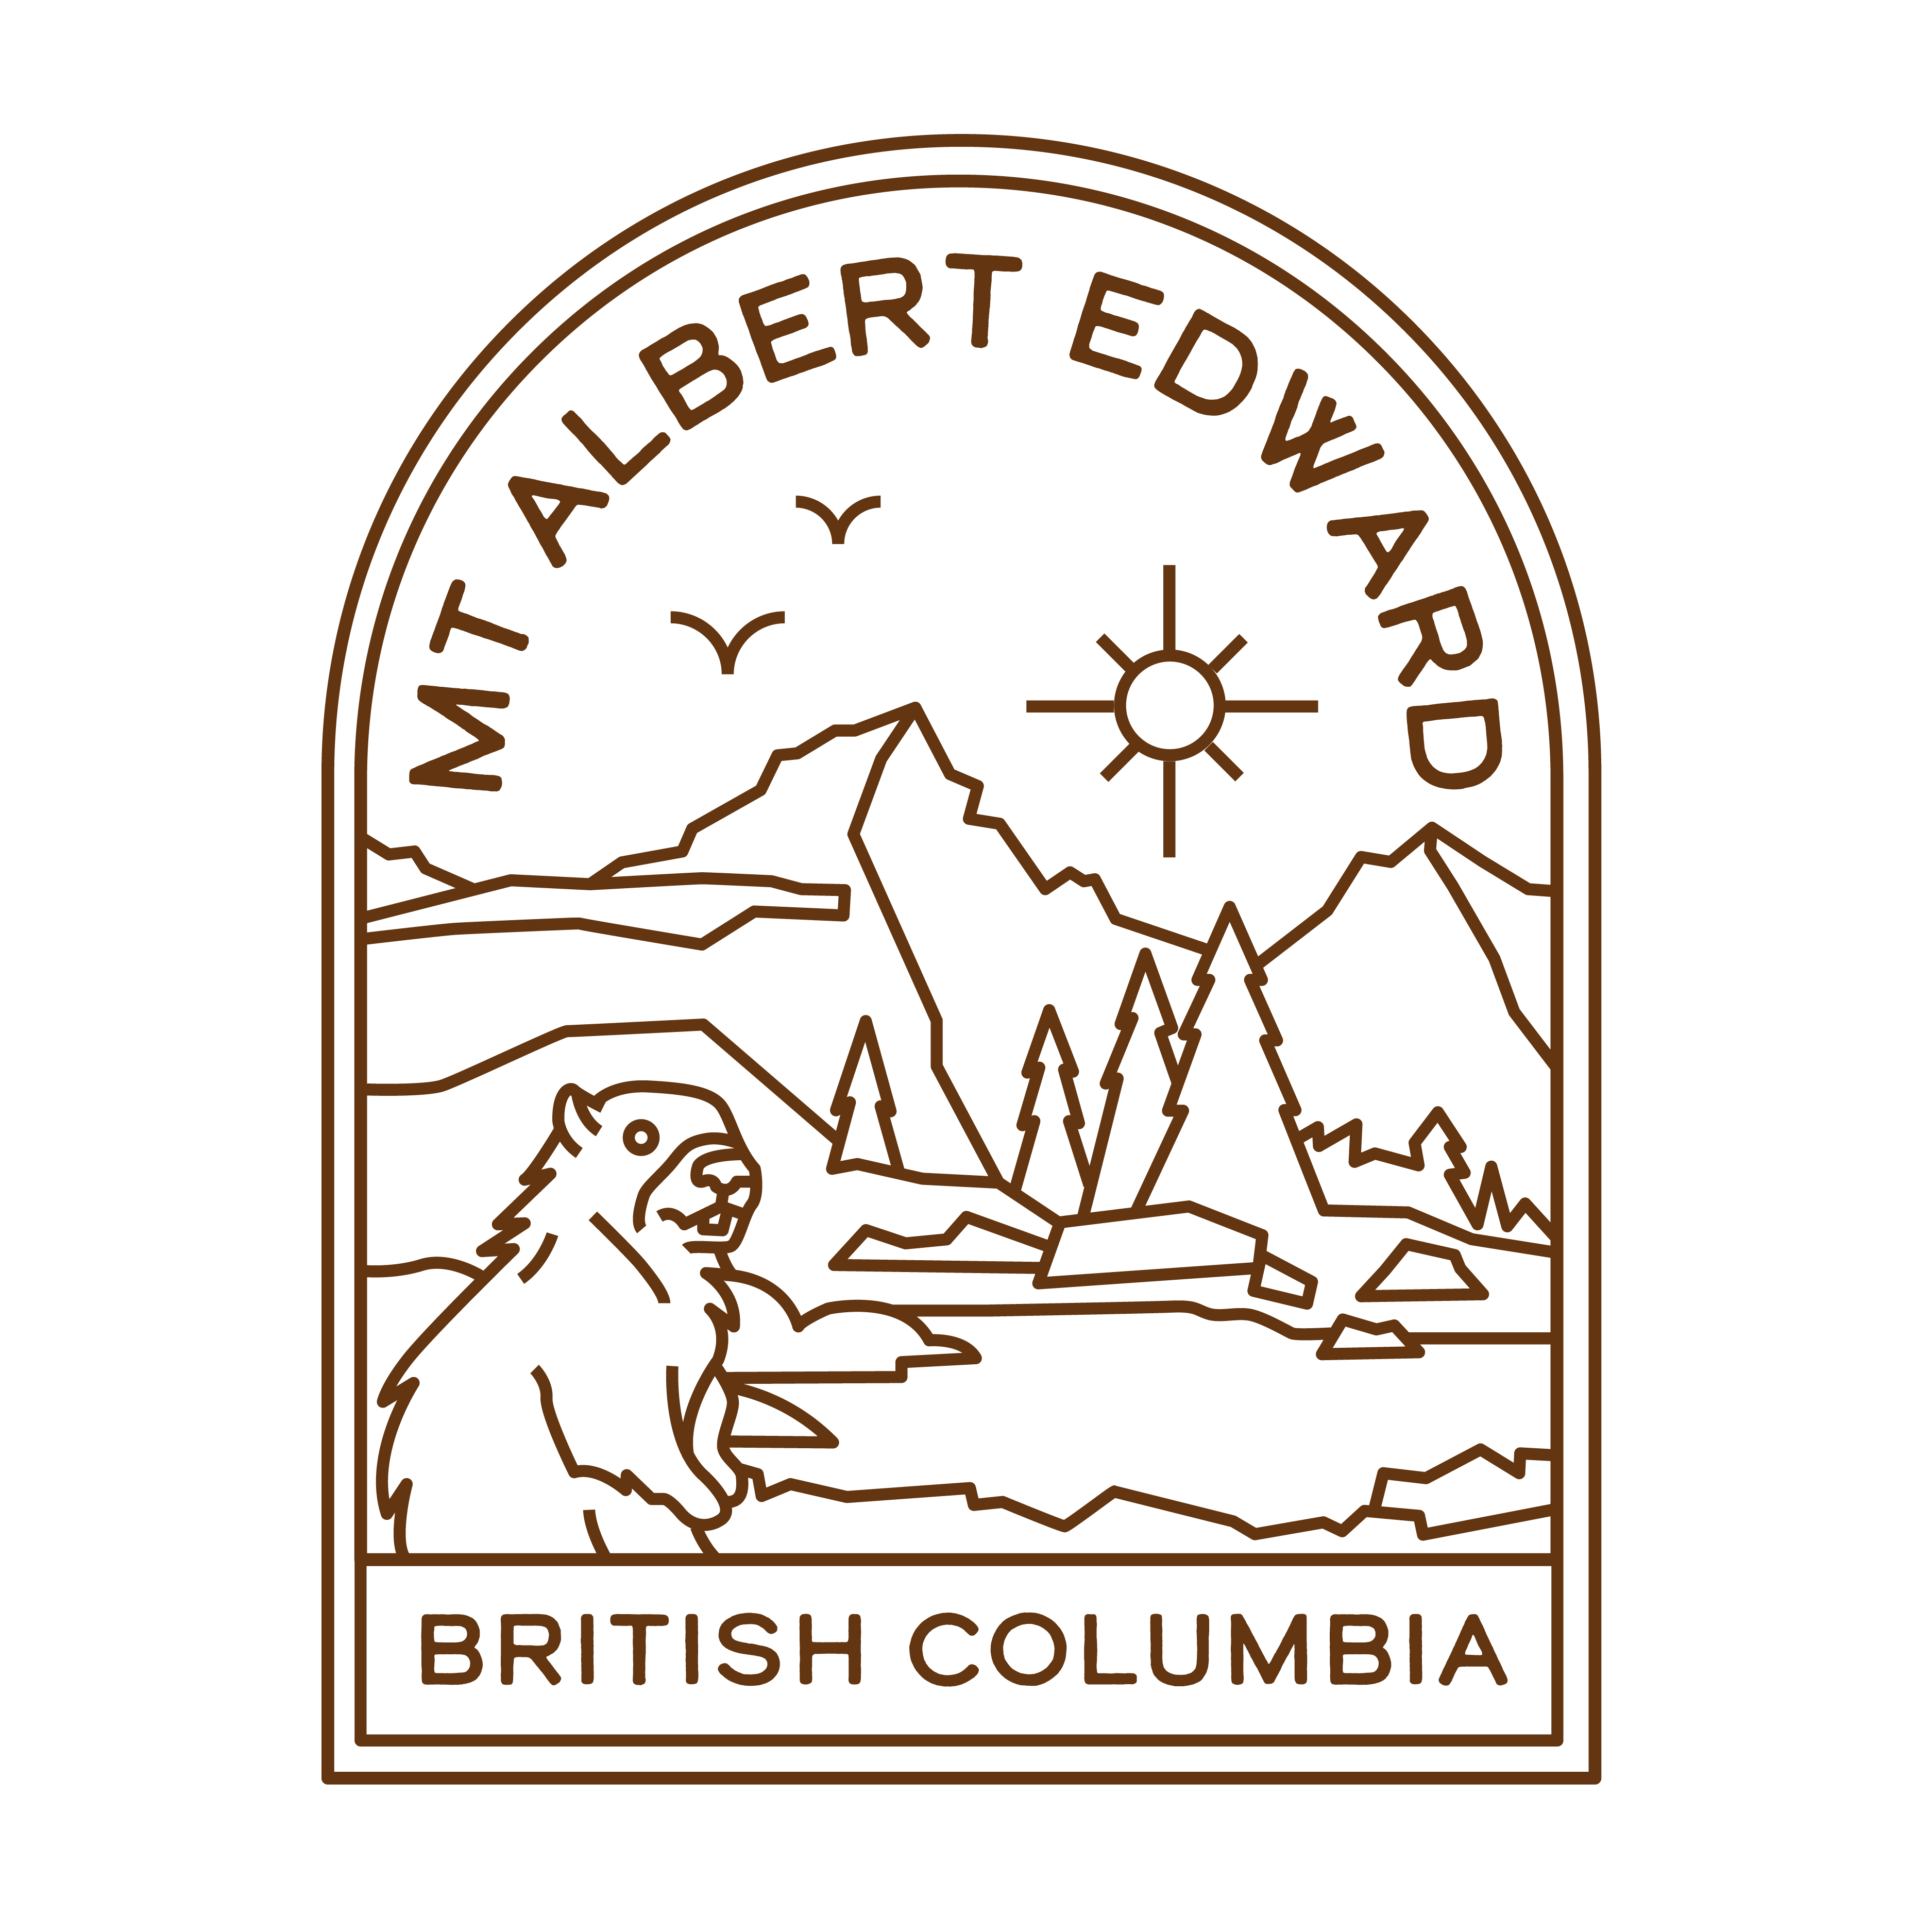 Mt Albert Edward logo design by logo designer Caribou Creative for your inspiration and for the worlds largest logo competition